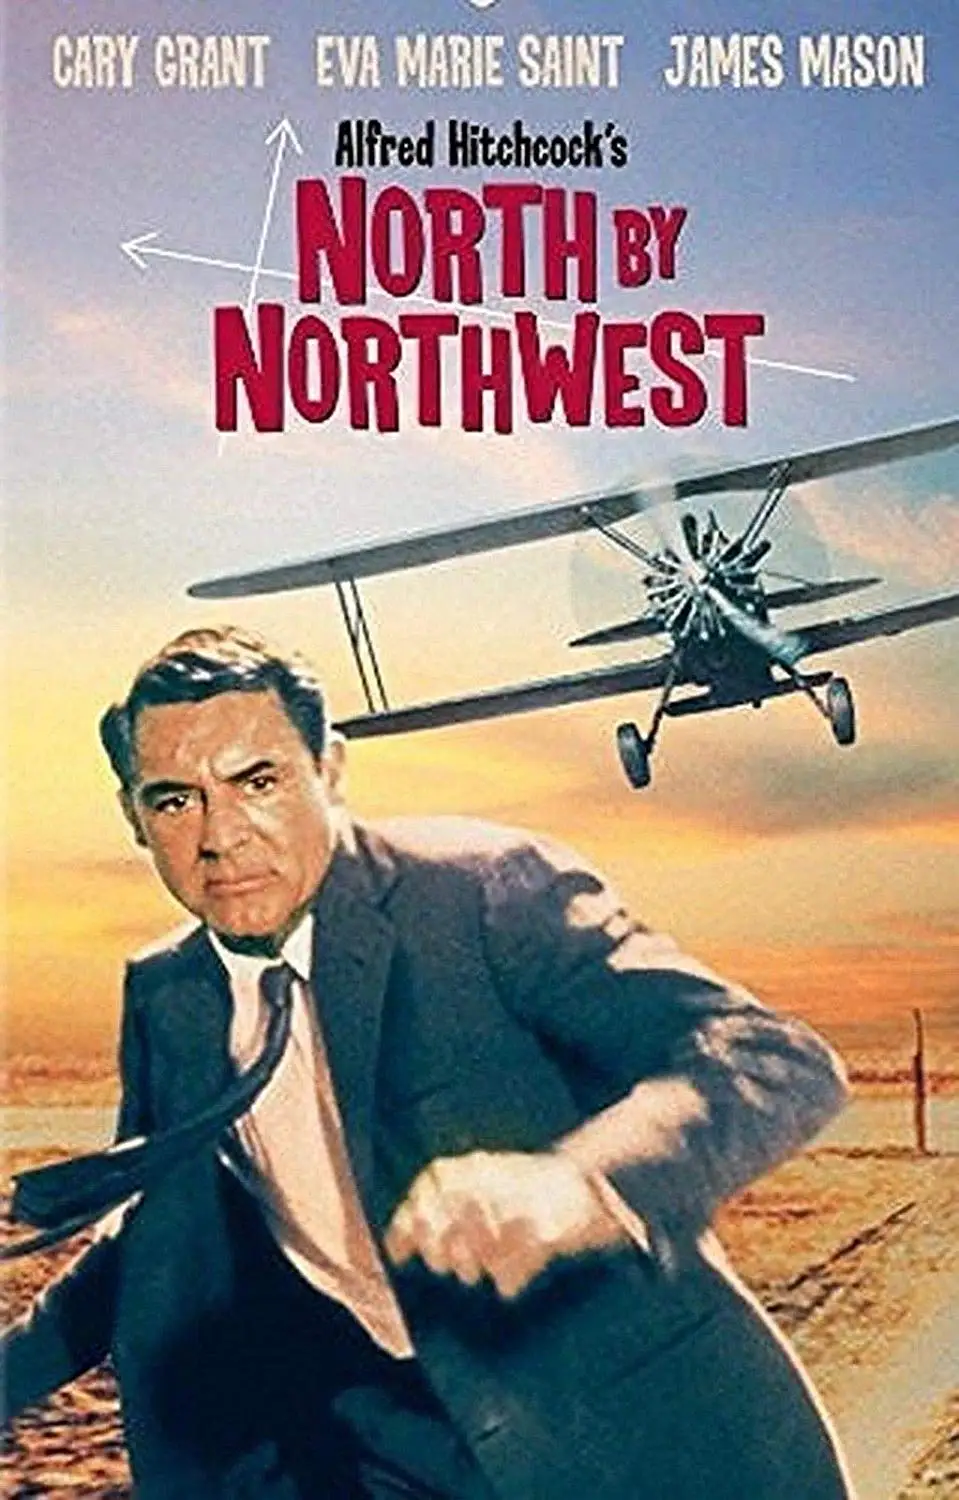 

Metal Plaque Tin Sign North By Northwest Movie Poster Cinema Corridor Club House Wall Decoration Plaque Metal Plate 12*8 Inches